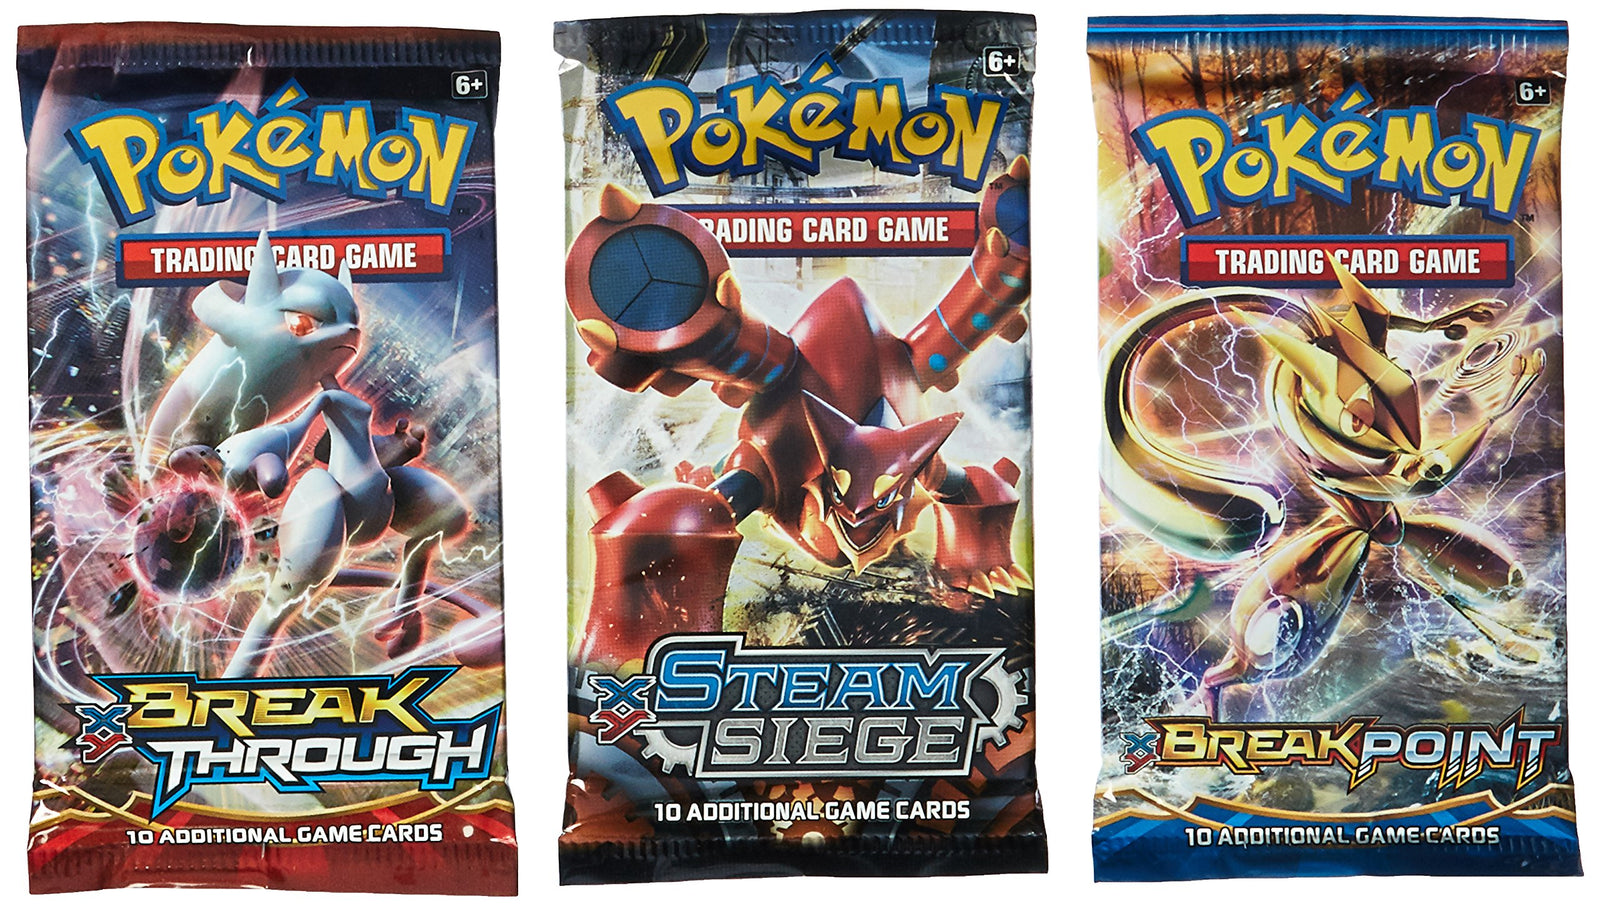 Pokemon TCG: 3 Booster Packs – 30 Cards Total| Value Pack Includes 3 Blister Packs of Random Cards | 100% Authentic Branded Pokemon Expansion Packs | Random Chance at Rares & Holofoils